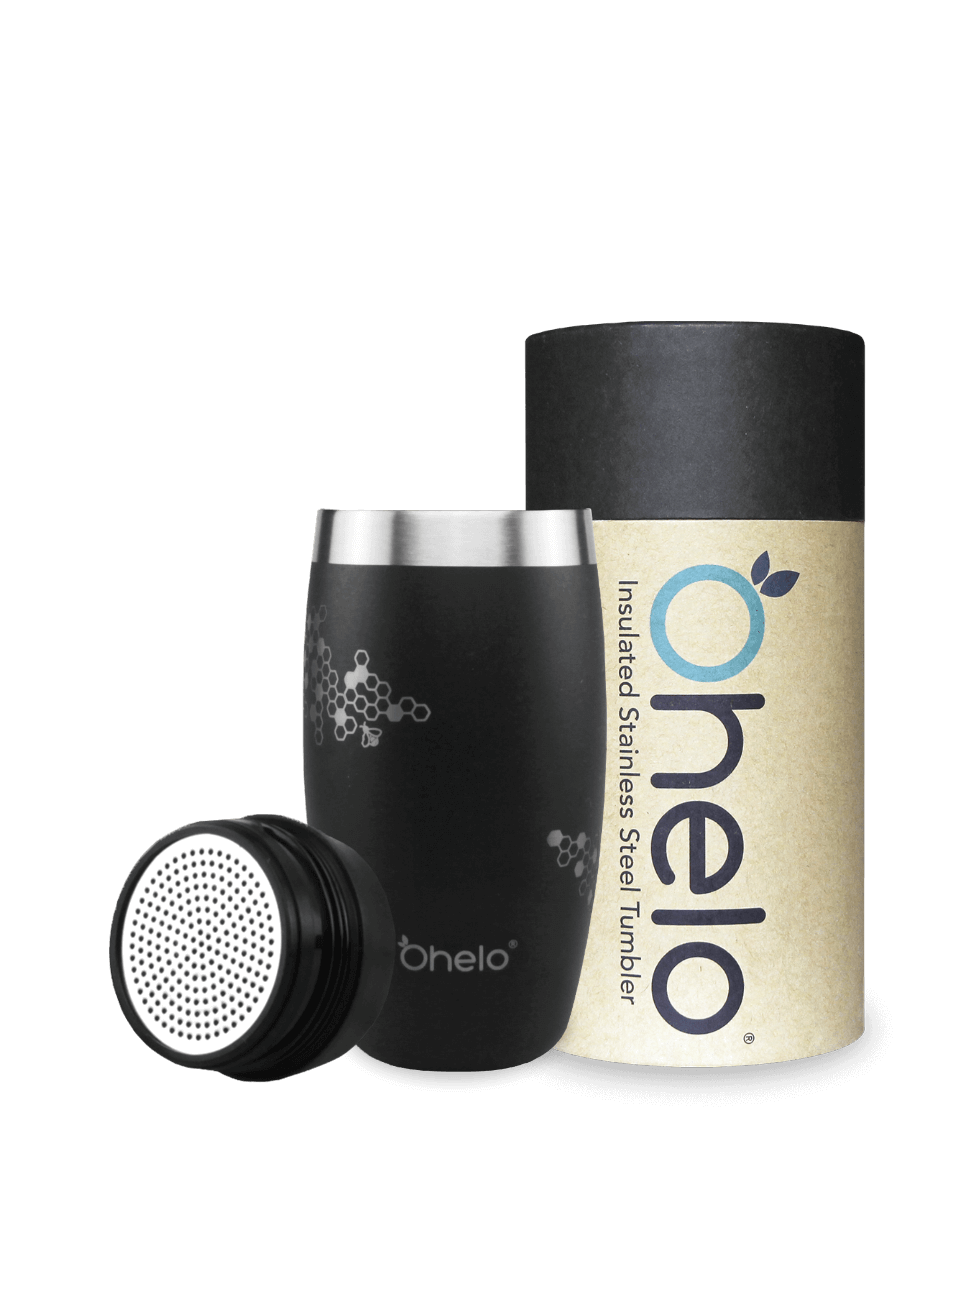 Ohelo insulated tumbler in black bee design with recycled packaging